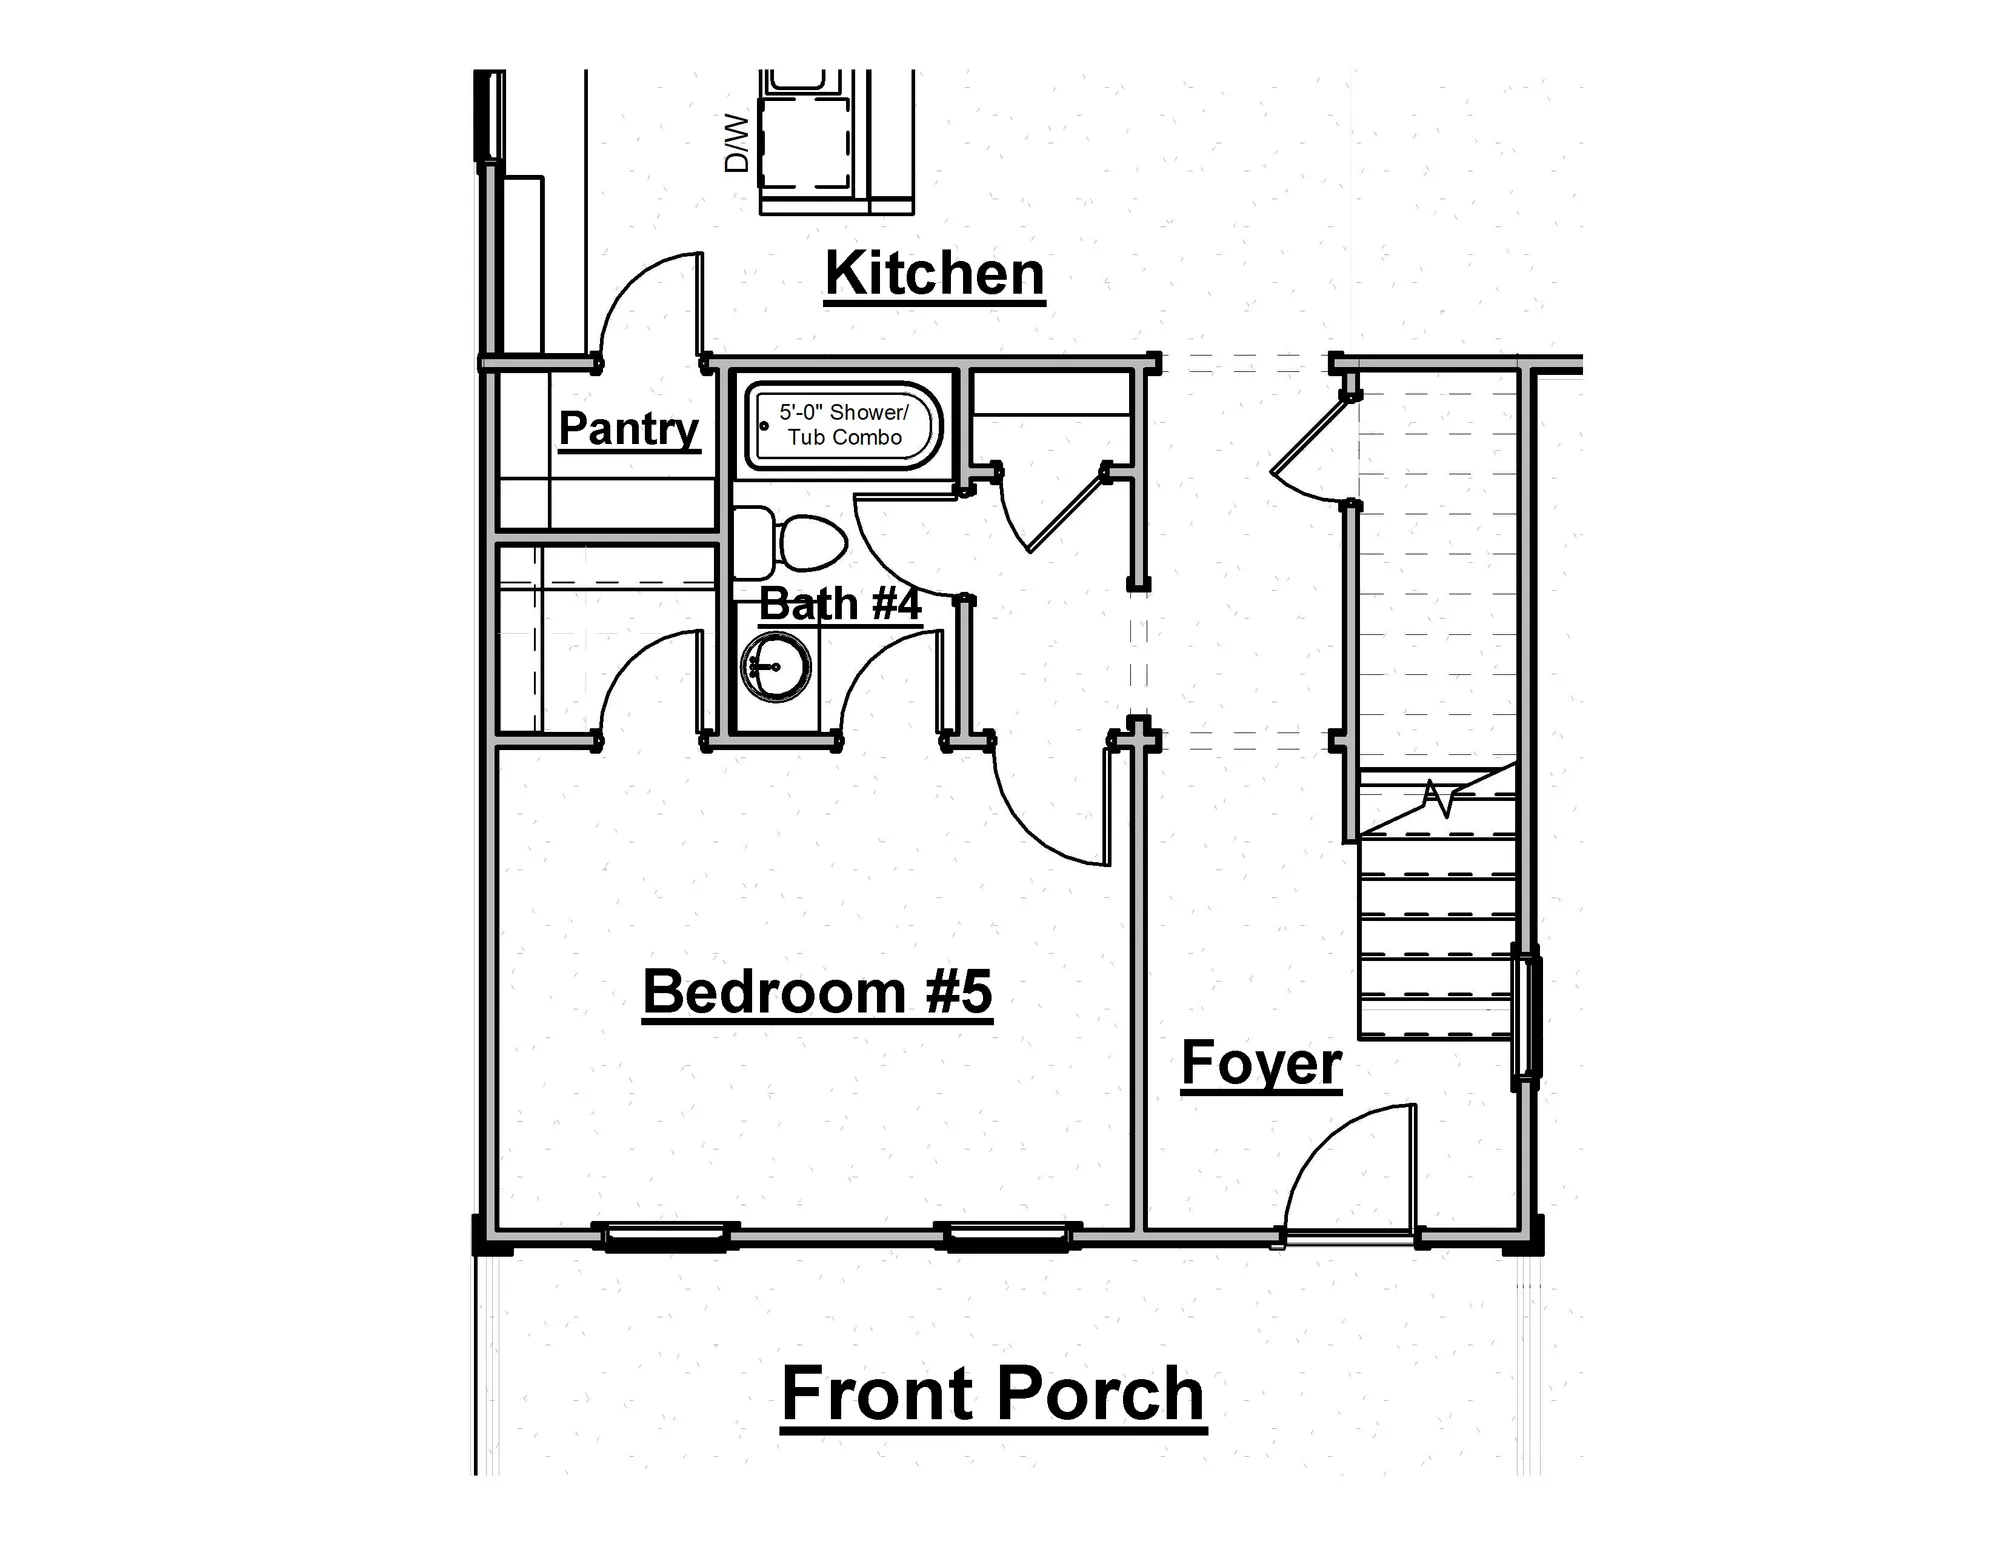 Bed 5 - Bath 4 Option - undefined